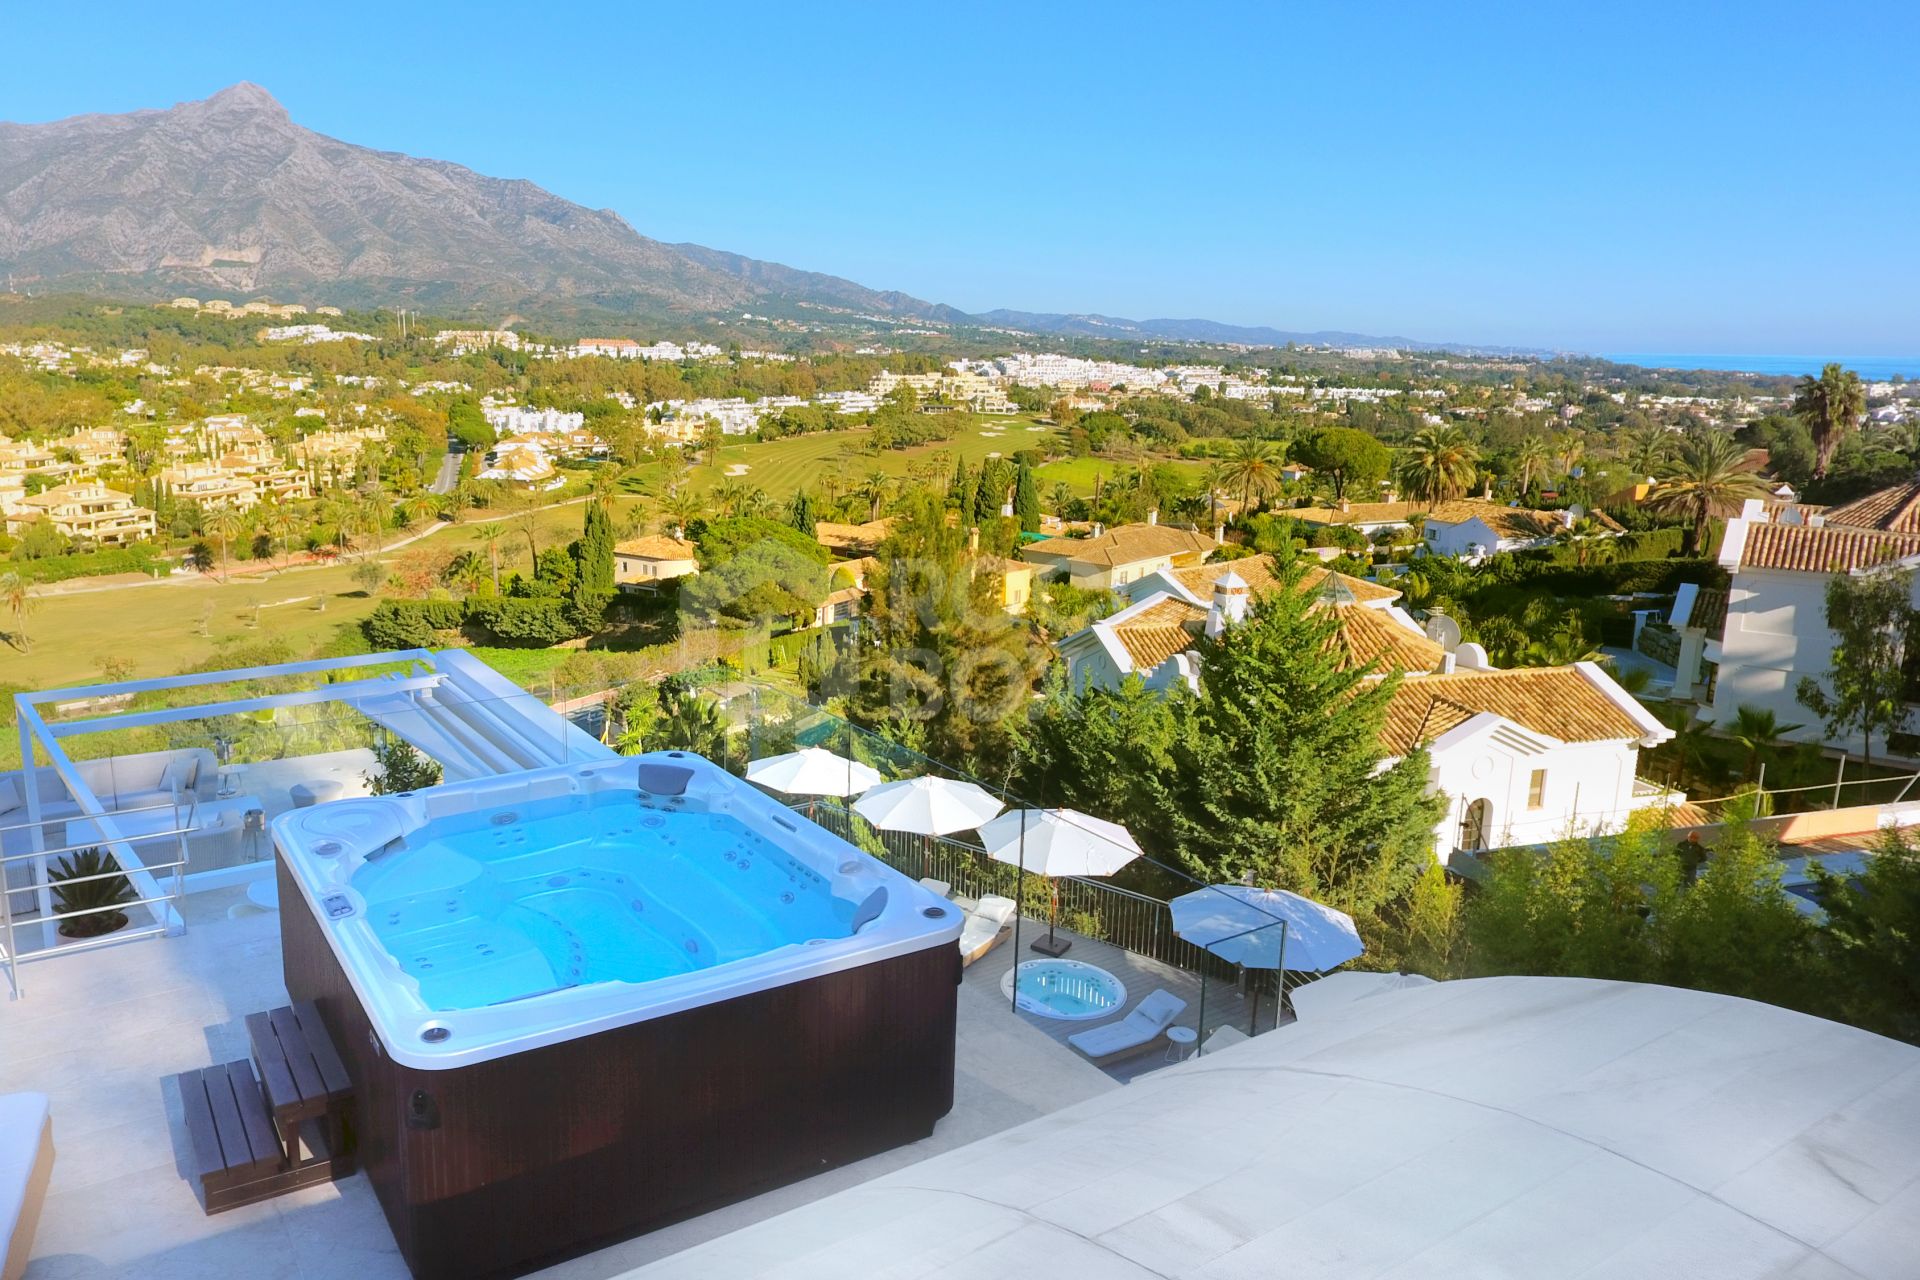 Villa for sale in Nueva Andalucía, a five-minute drive from Puerto Banus and city centre, as well as to beaches